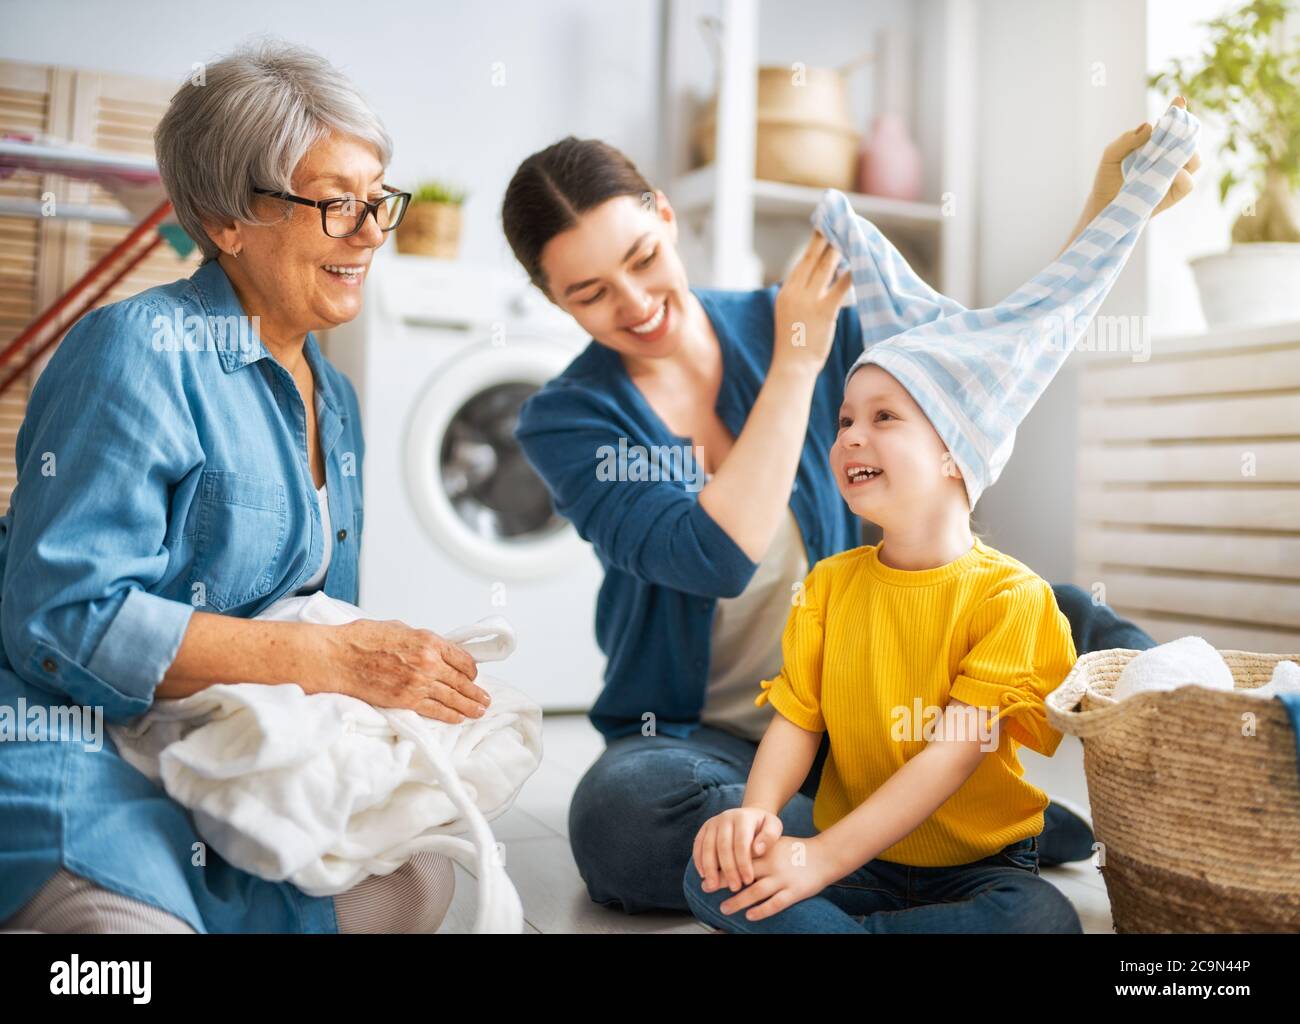 grandma, mom and child are doing laundry at home. three generations of family Stock Photo